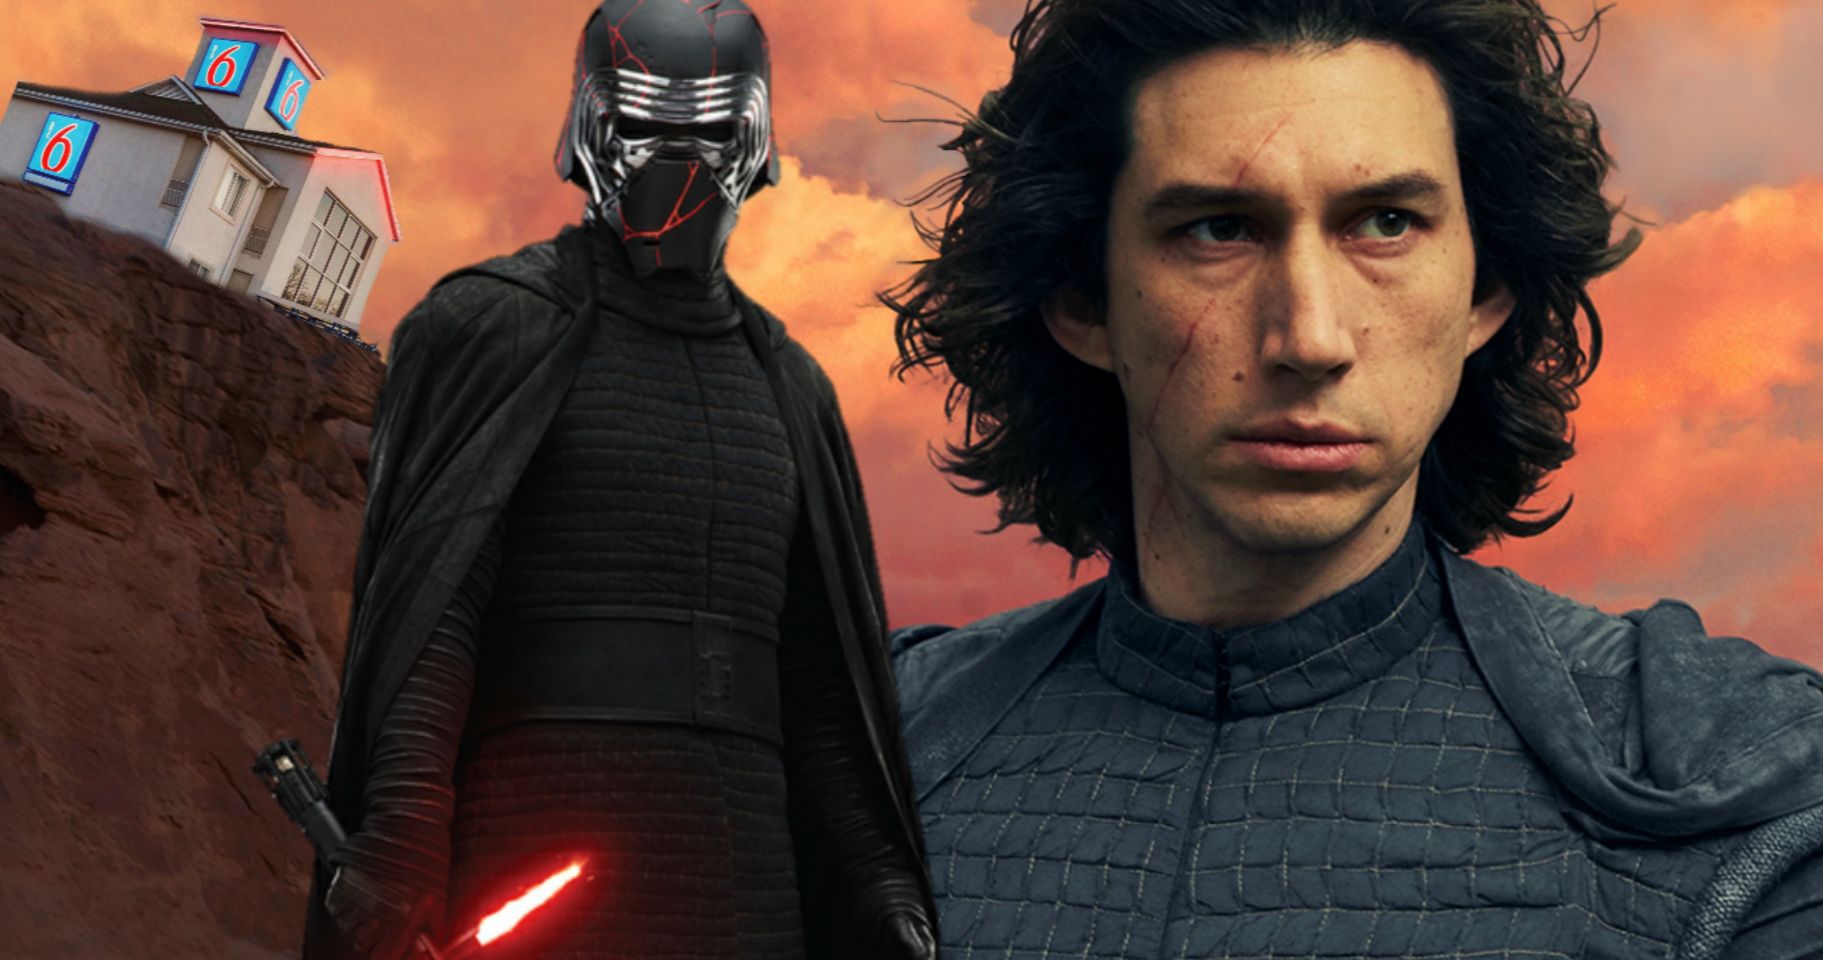 Star Wars Fan Dressed as Kylo Ren Once Stalked Adam Driver to His Hotel